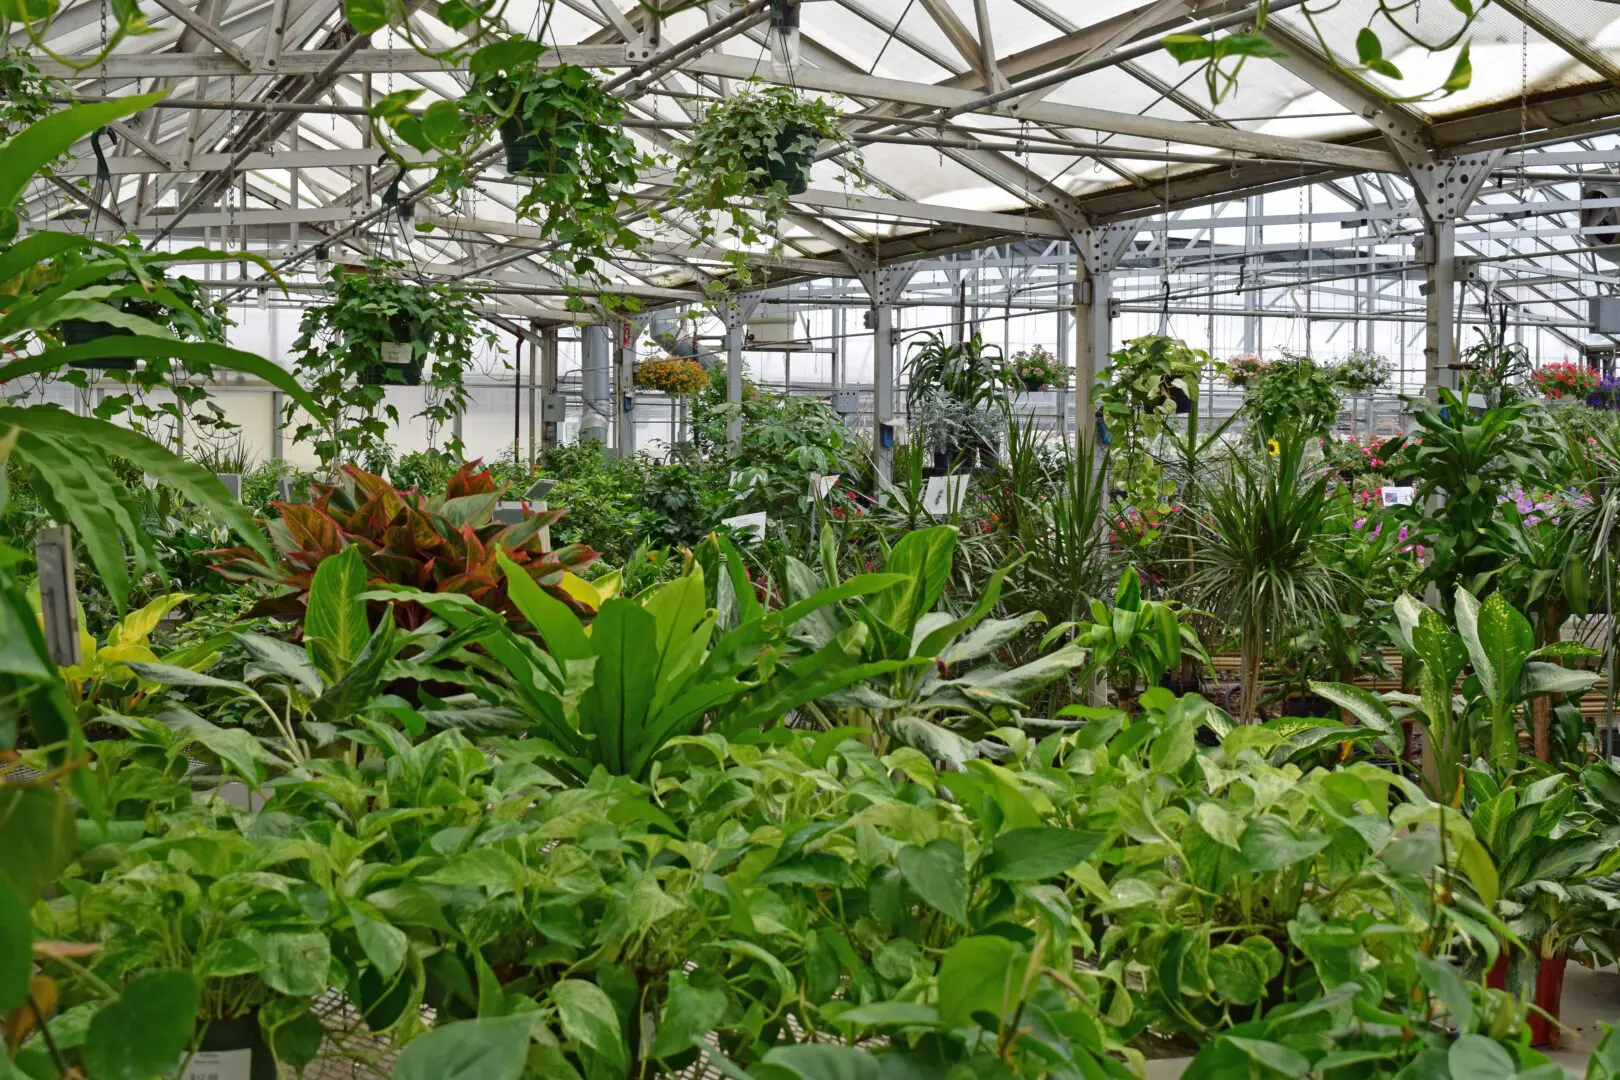 A lush greenhouse filled with various plants and flowers, featuring a glass roof and structural beams, with visible hanging baskets and green foliage, including a unique collection of cacti.